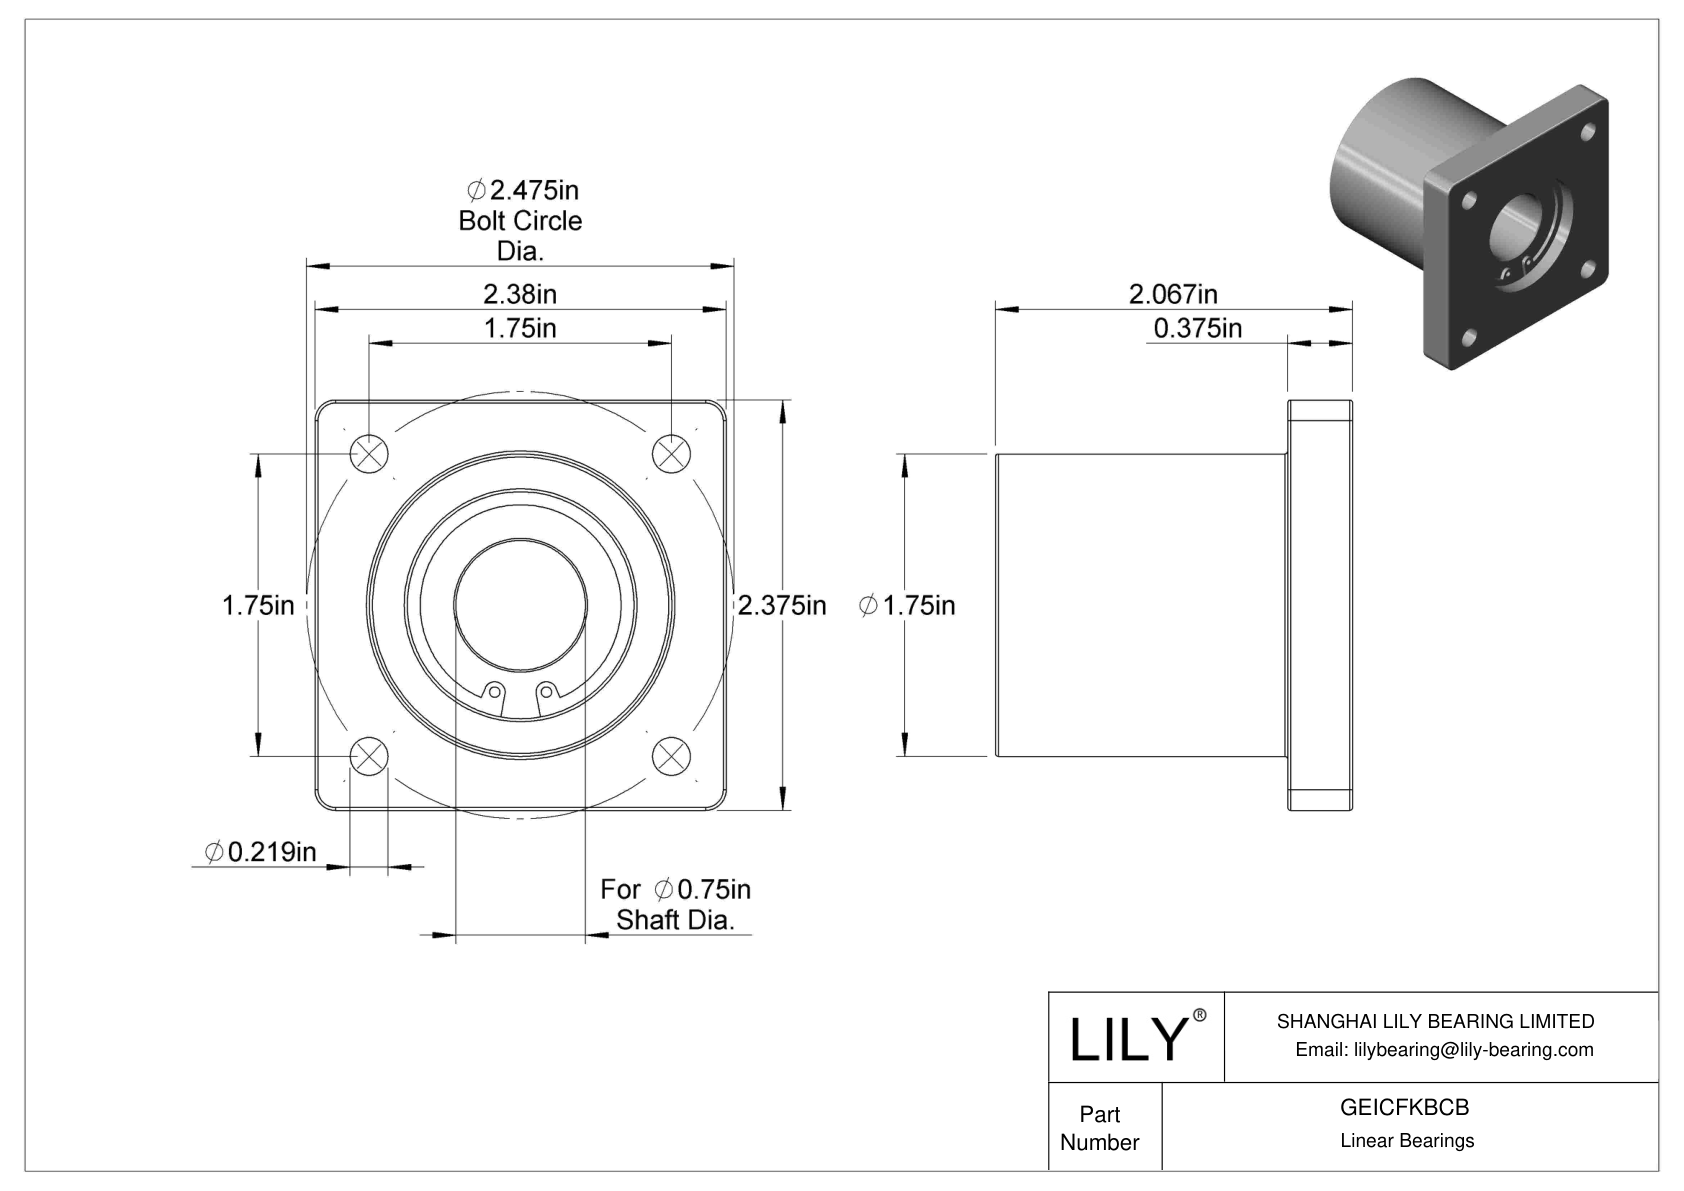 GEICFKBCB Chemical-Resistant Flange-Mounted Linear Sleeve Bearings cad drawing